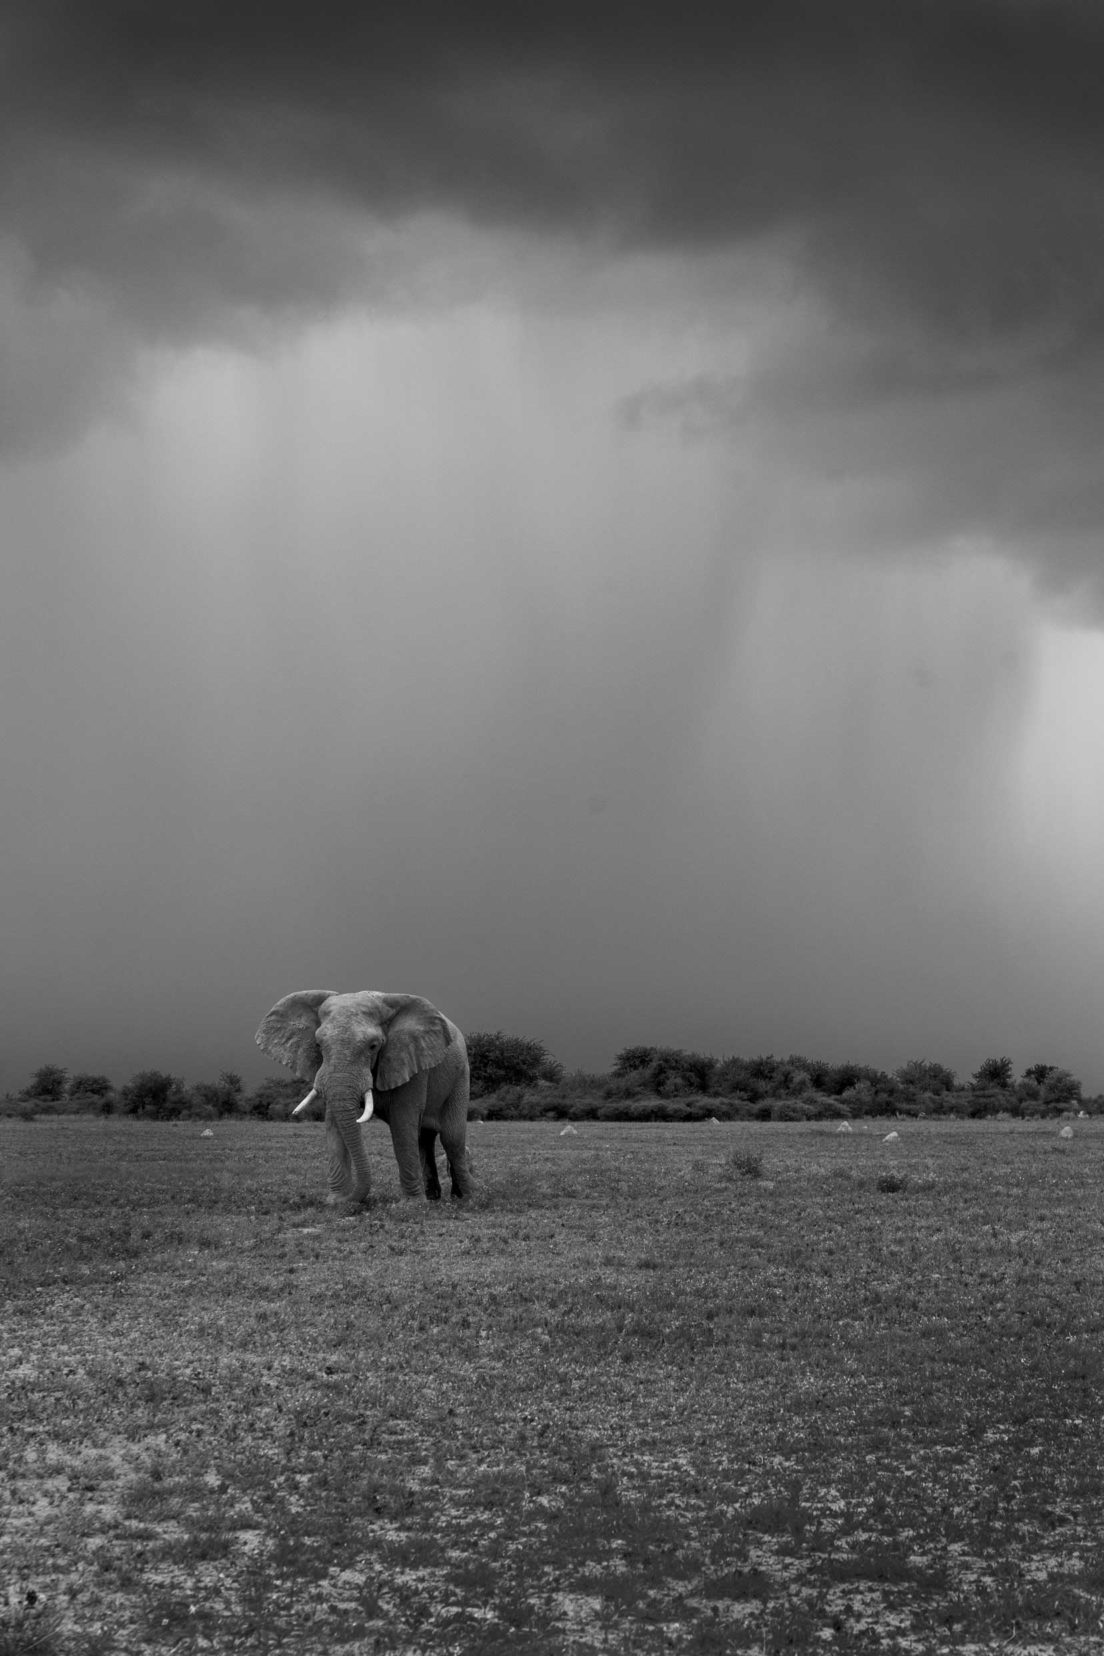 Nxai Pan elephant with storm clouds behind